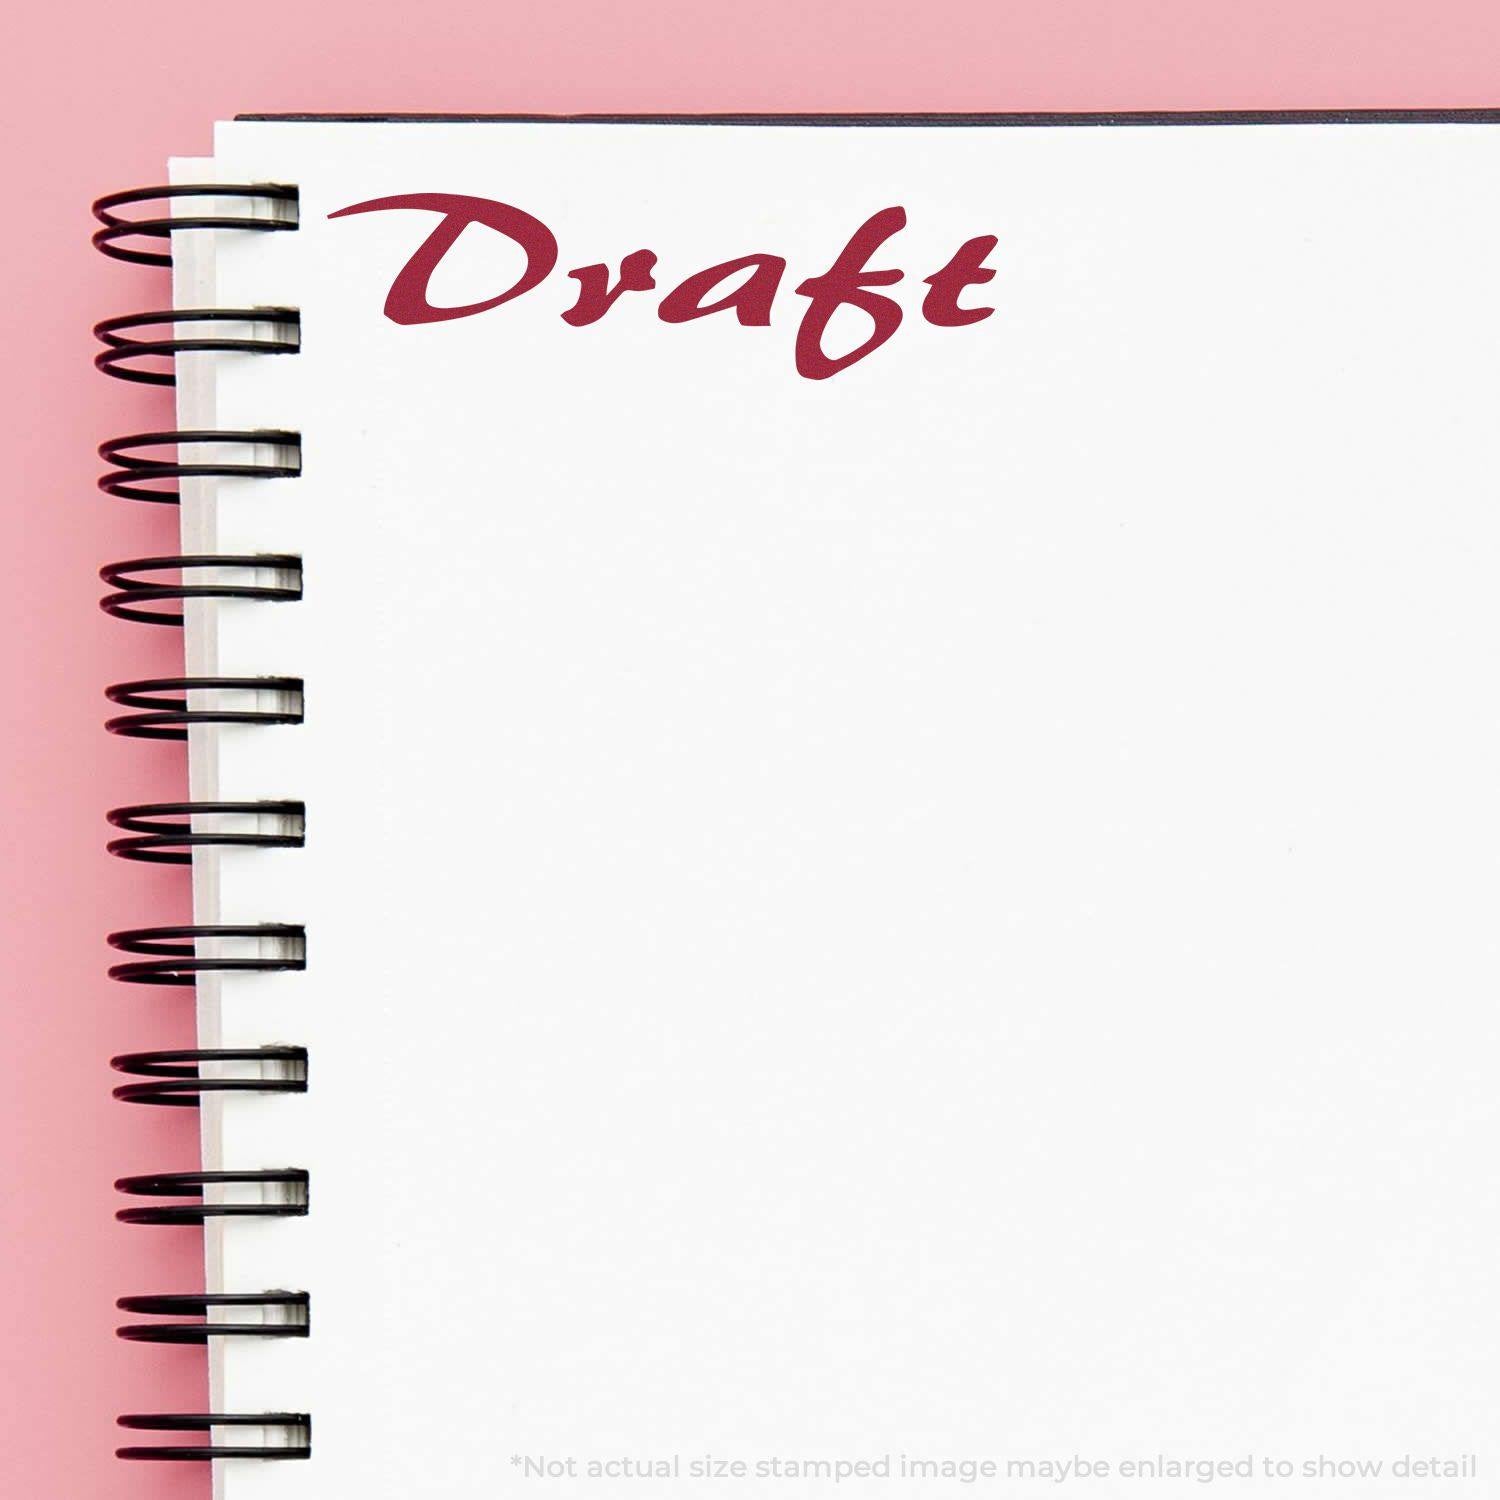 A stock office pre-inked stamp with a stamped image showing how the text "Draft" in a cursive font is displayed after stamping.